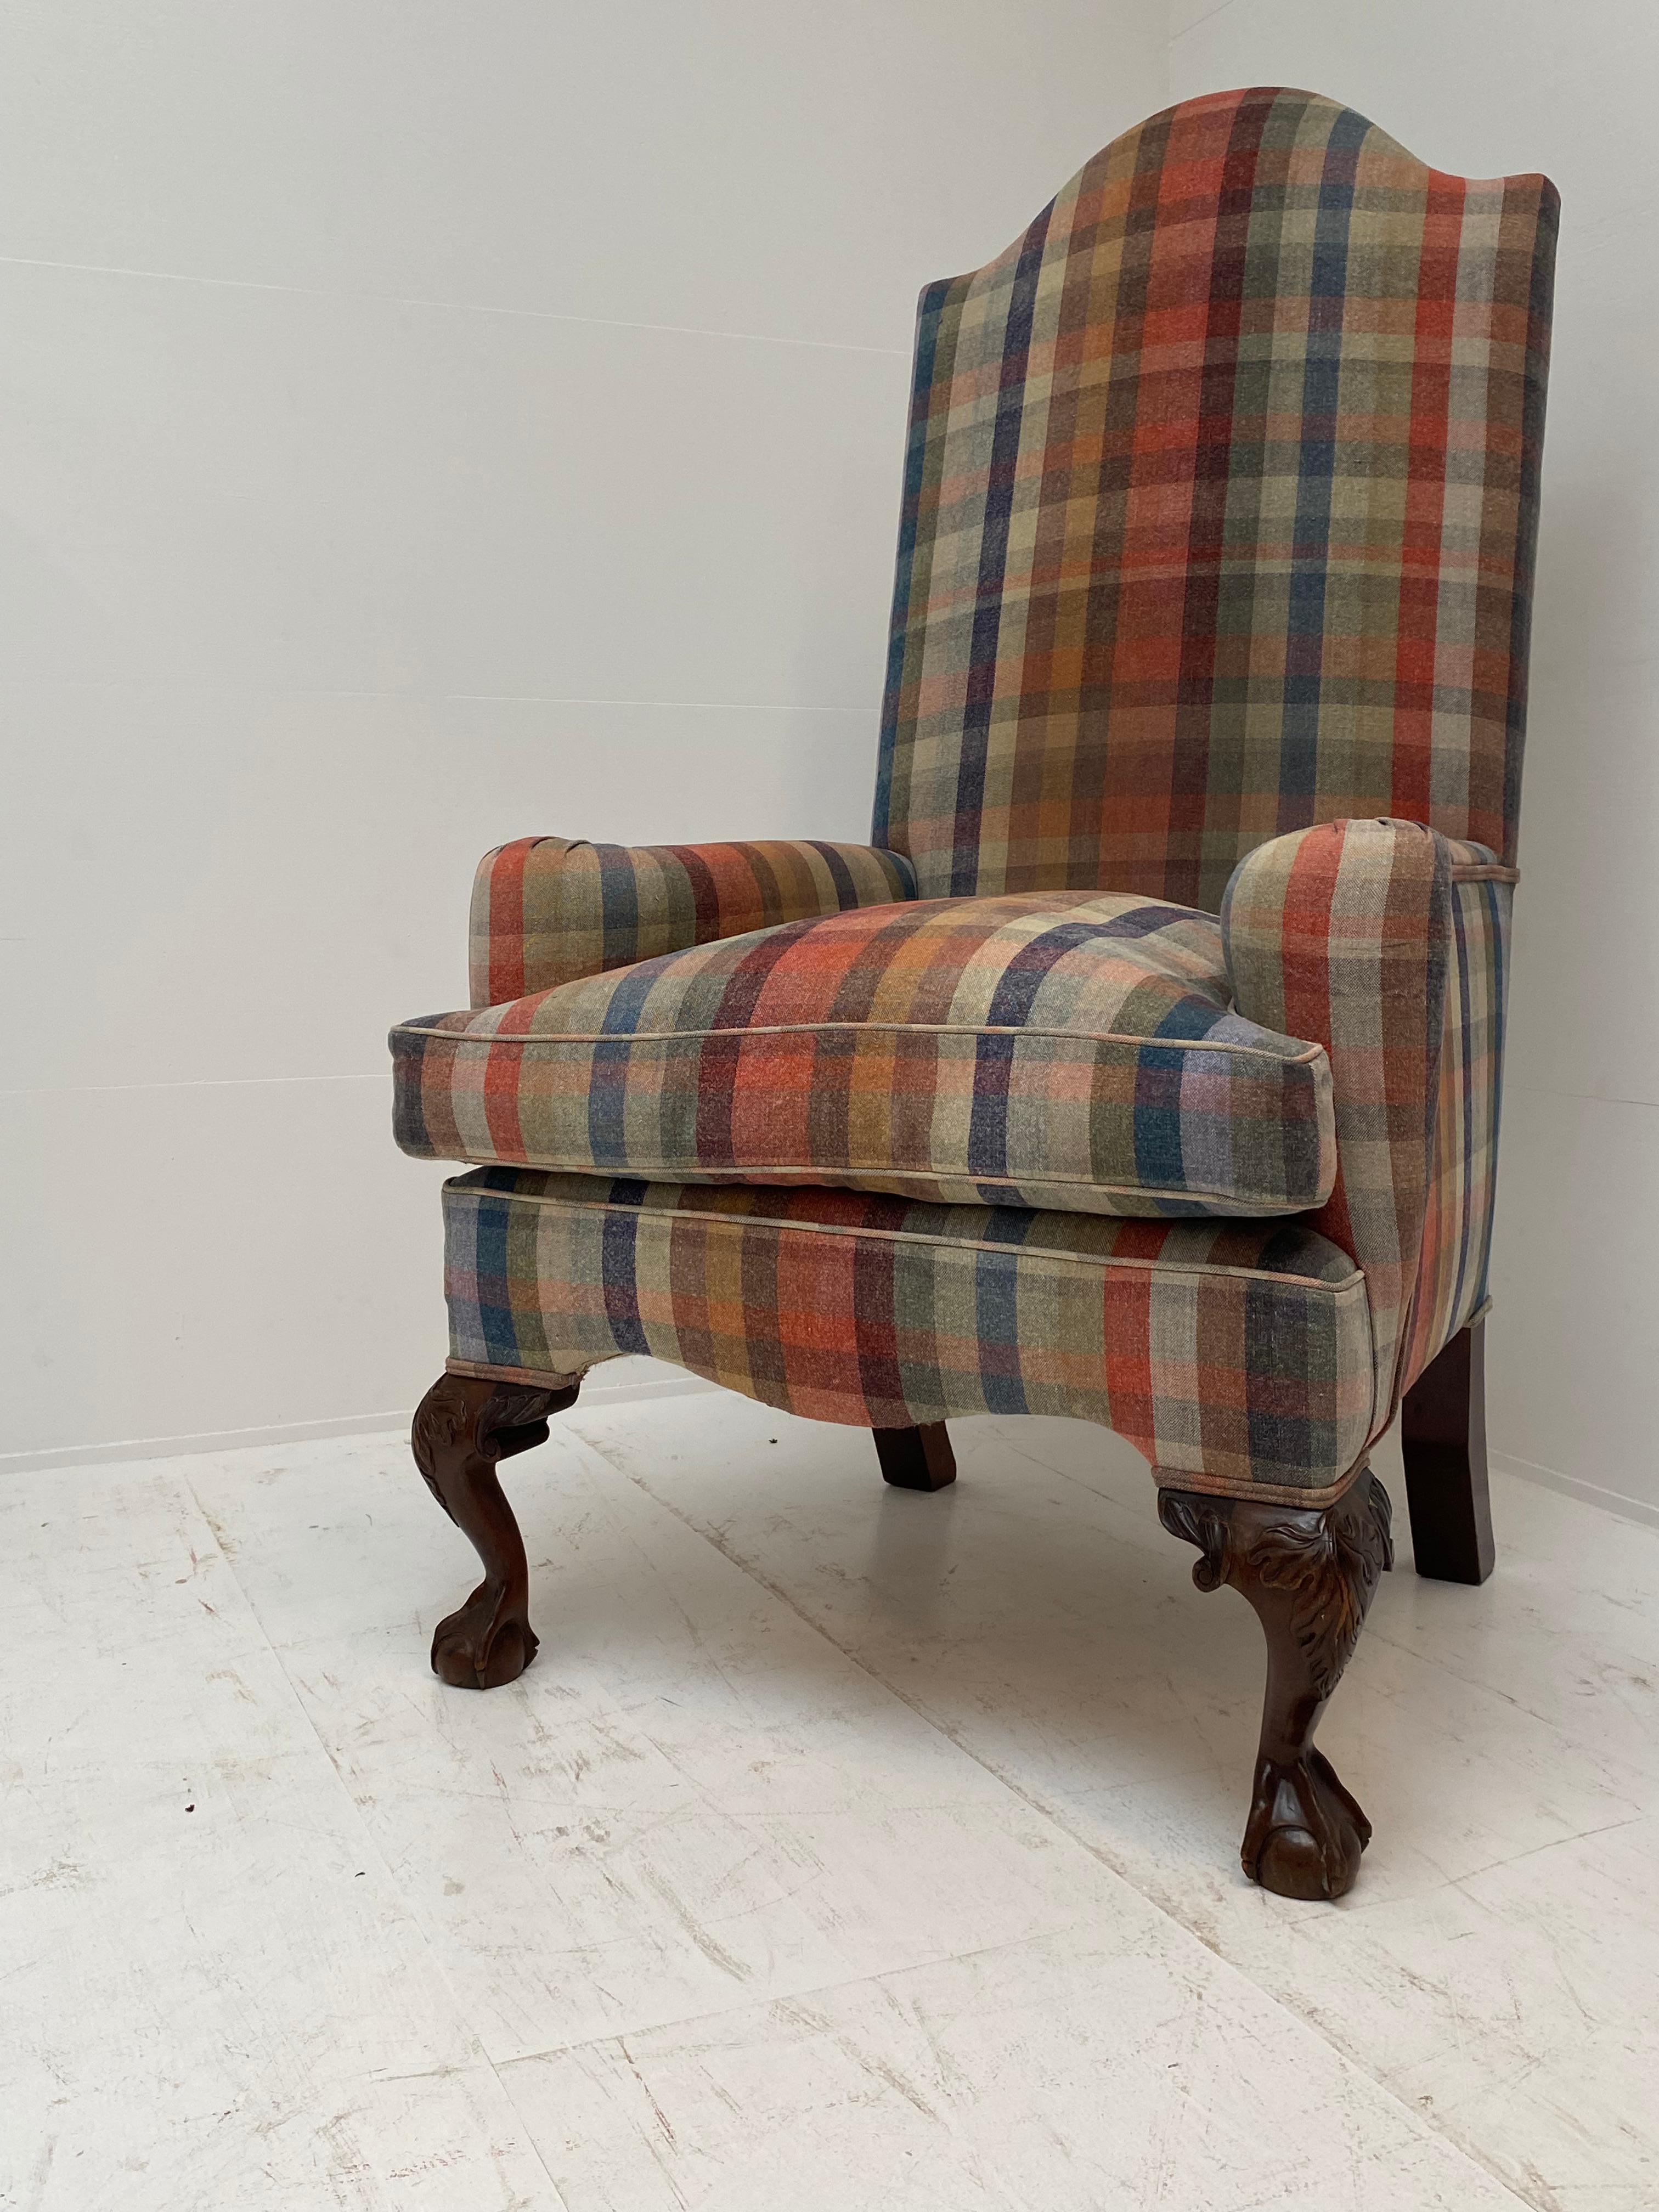  Antique Scottish Wing Chair with Claw-Feet and Tartan Fabric 1